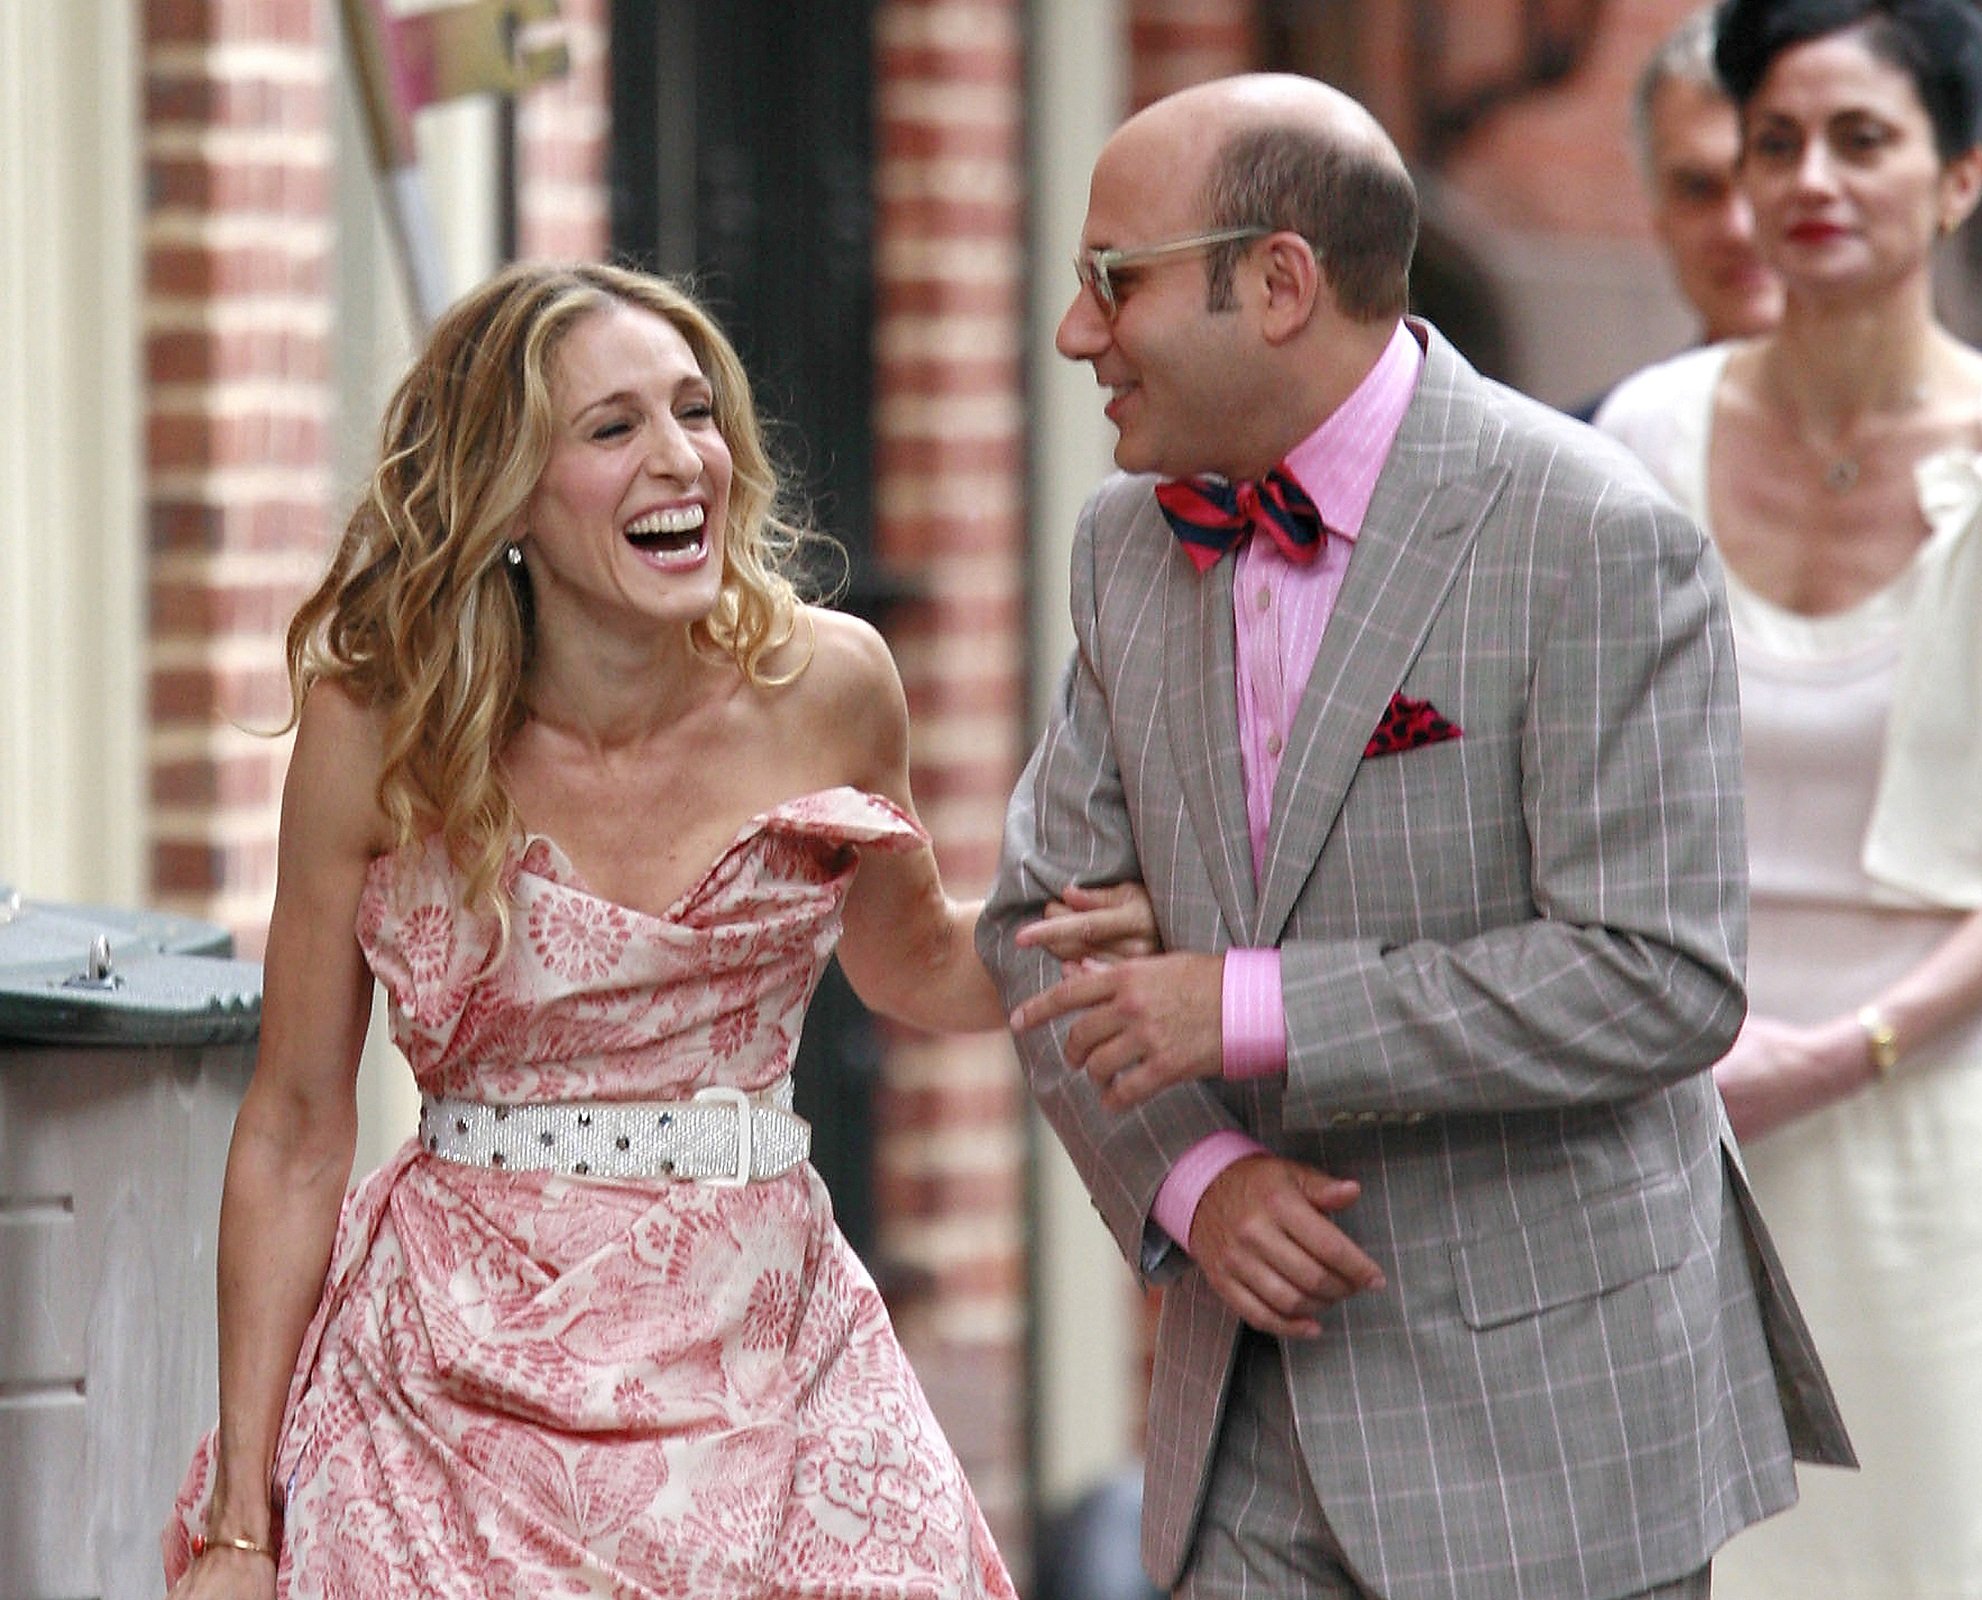 Sarah Jessica Parker Revealed That Willie Garson Believed Stanford Blatch Was the Most Popular ‘Sex and the City’ Character